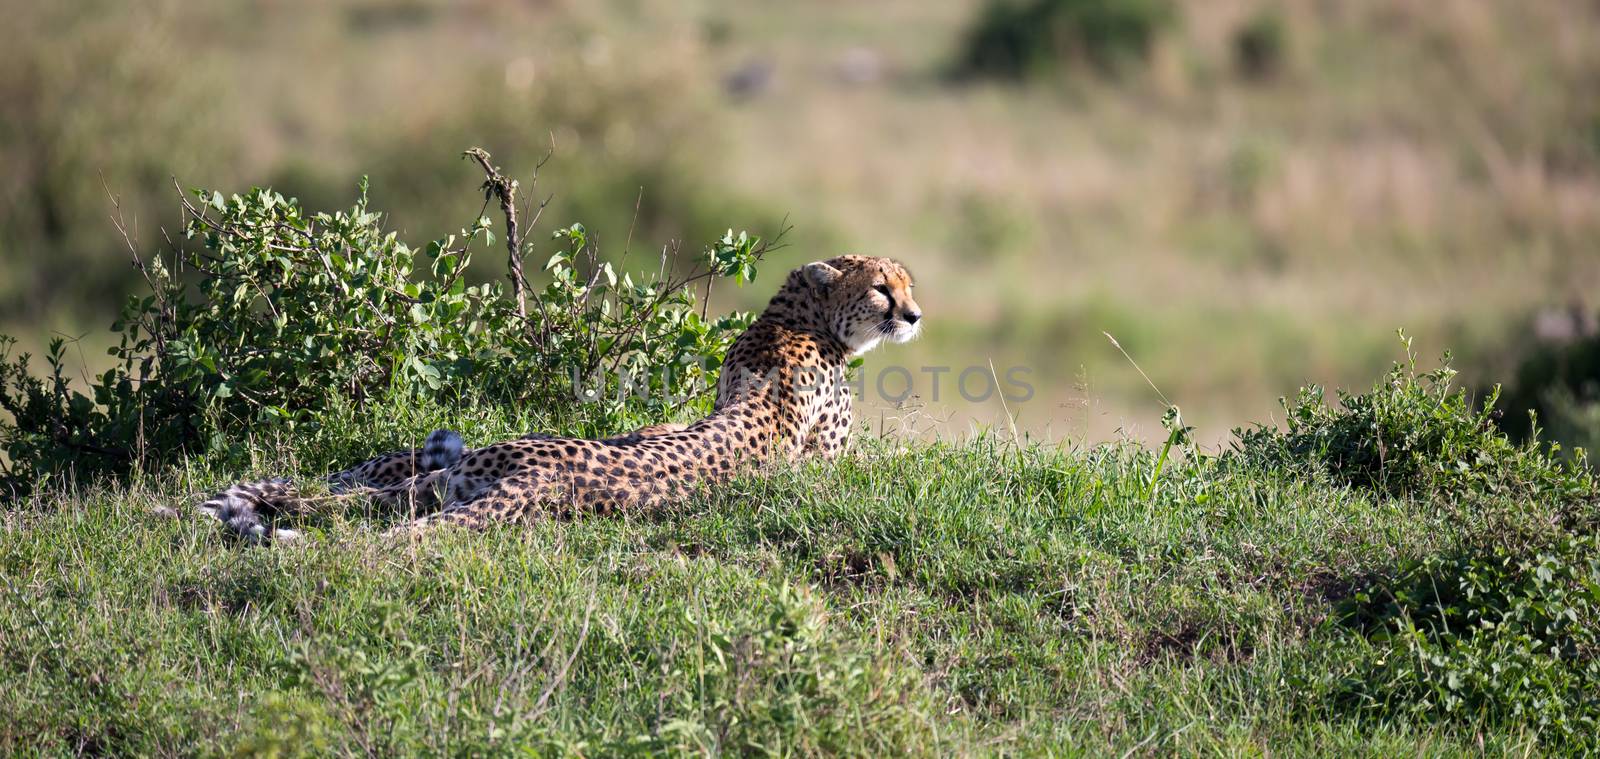 A cheetah mother with two children in the Kenyan savannah by 25ehaag6